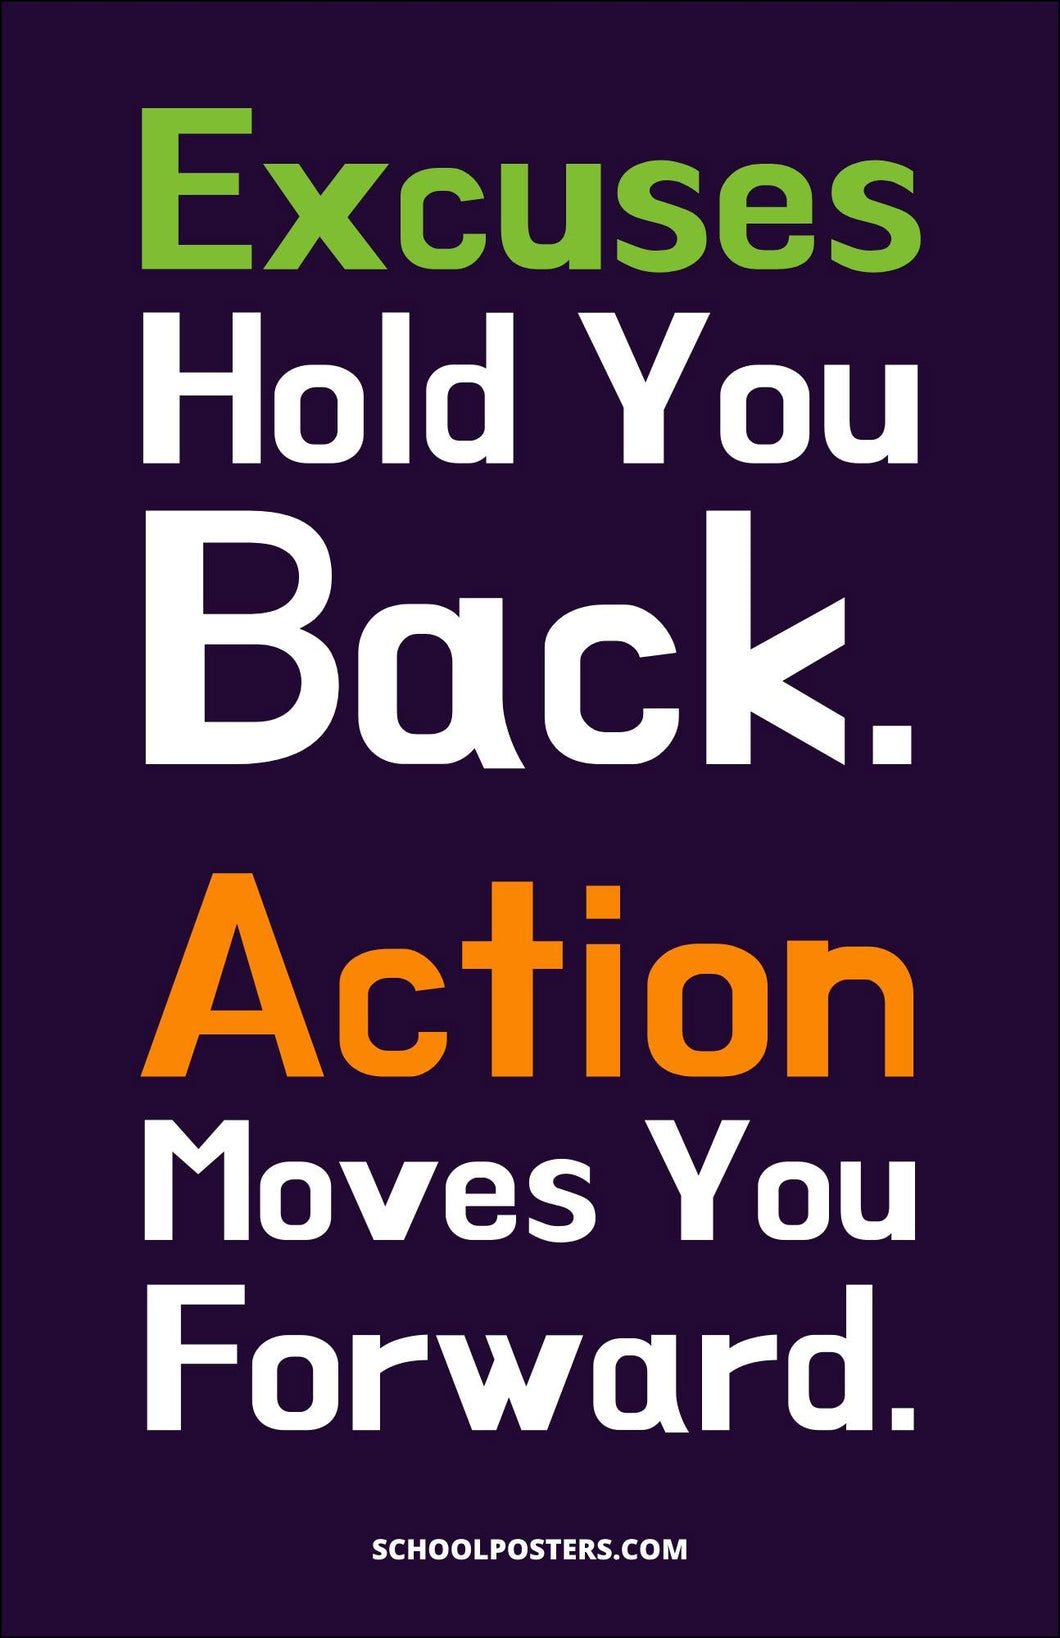 Excuses Hold You Back Poster